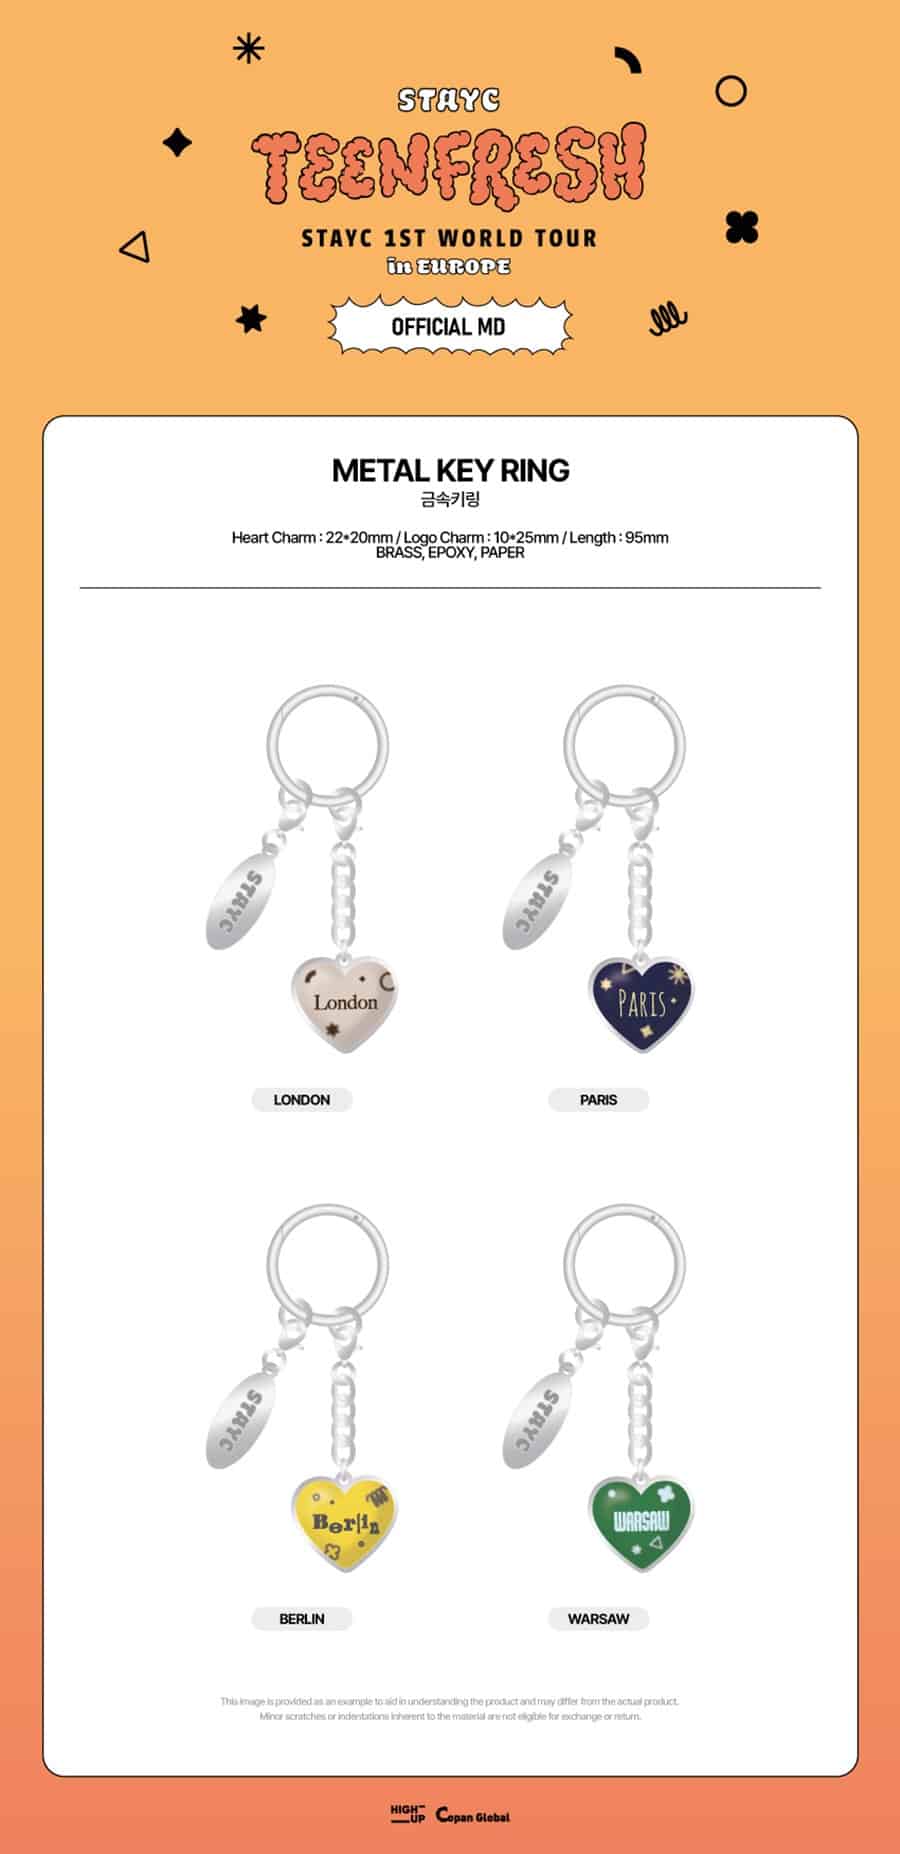 stayc-02-metal-key-ring-1st-world-tour-teenfresh-in-europe-official-md-wholesales